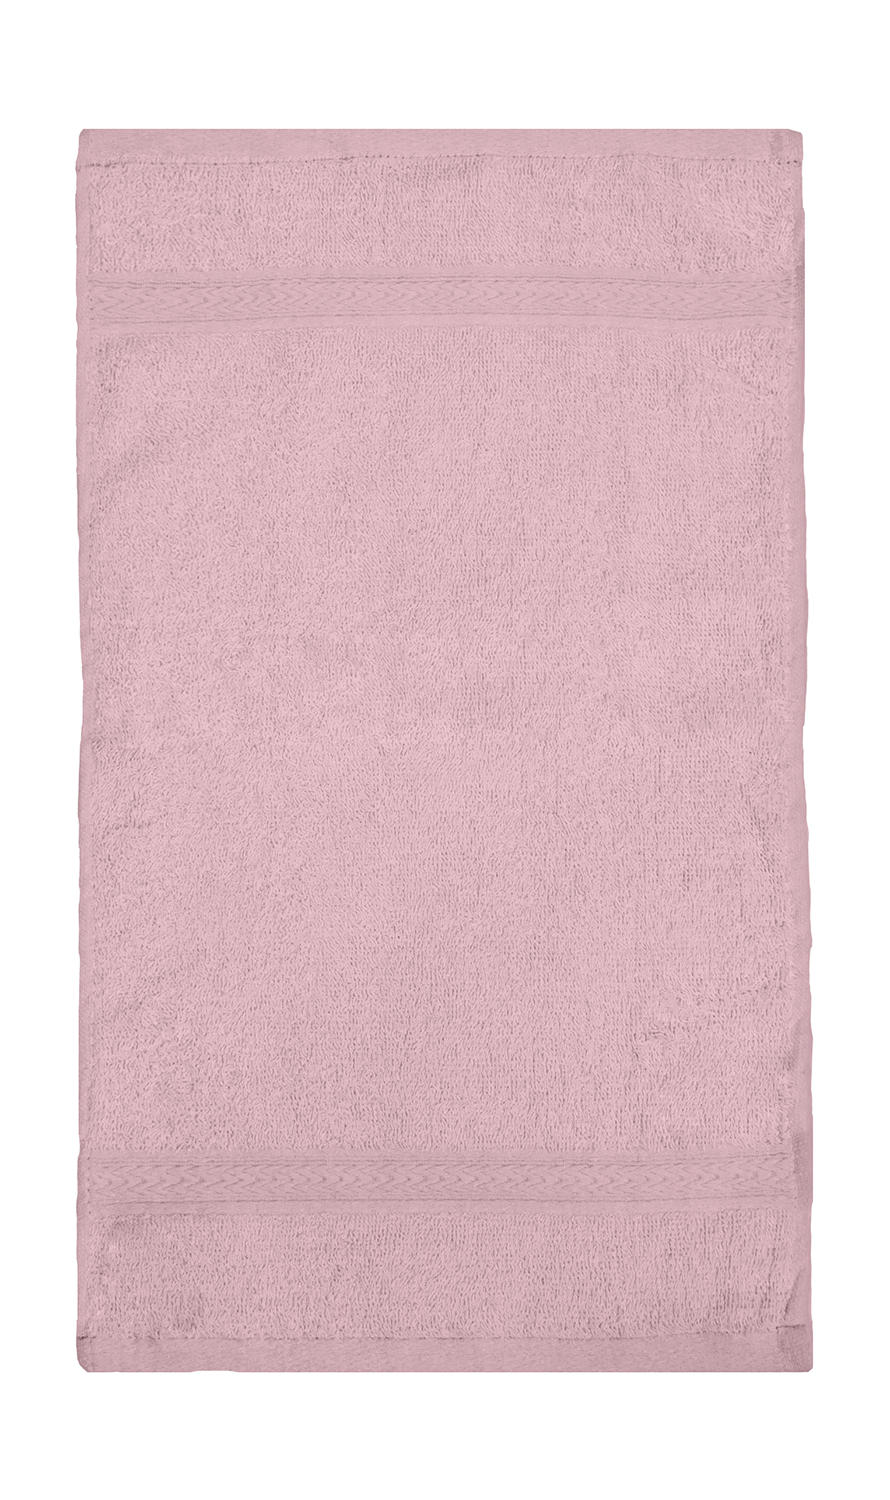  Rhine Guest Towel 30x50 cm in Farbe Pink